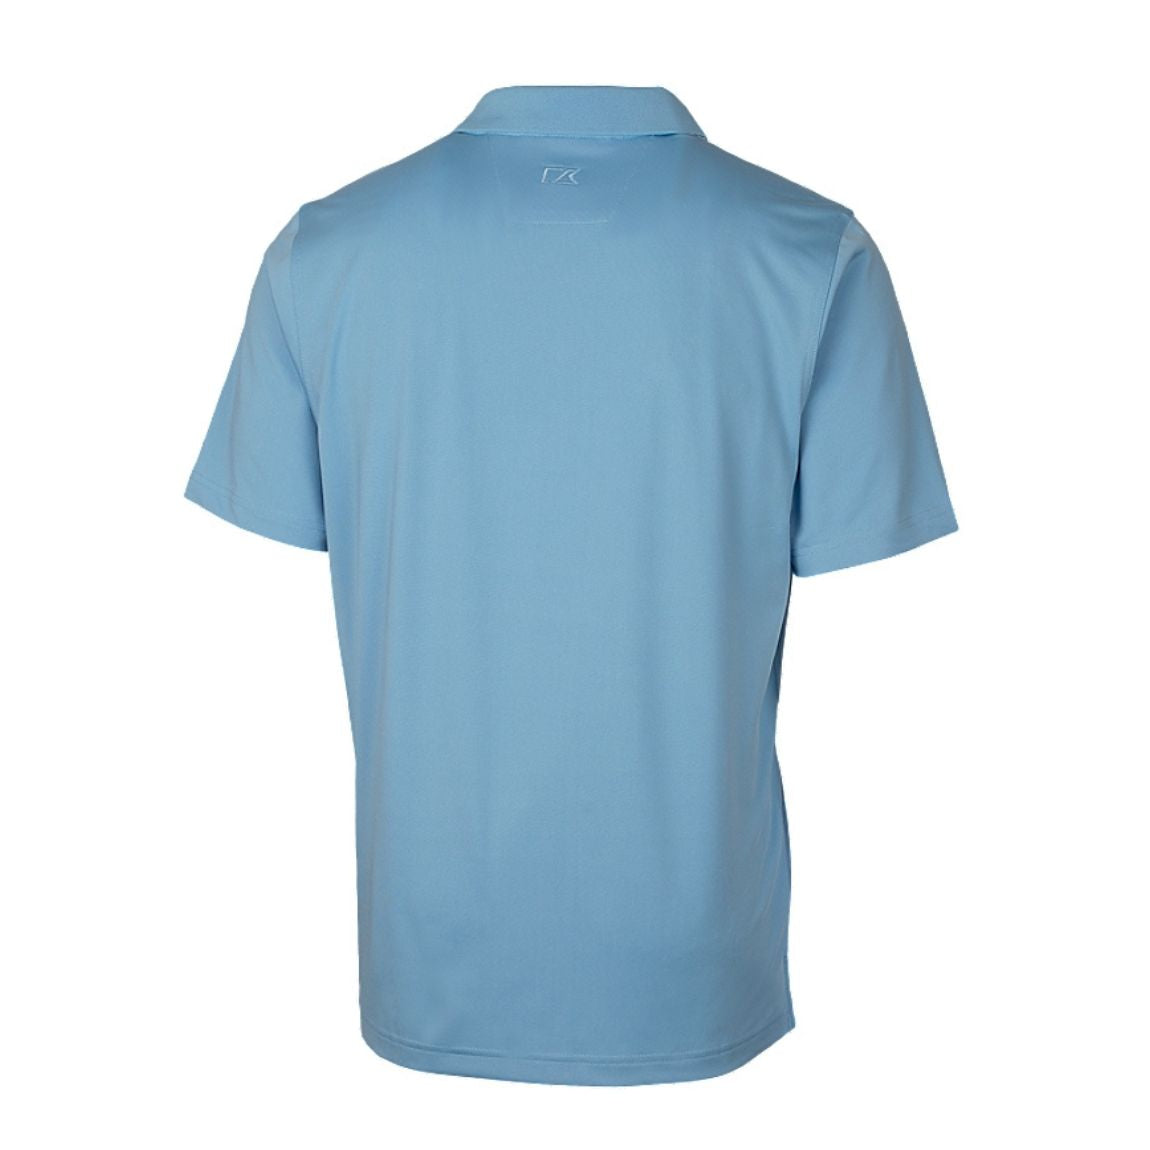 Cutter & Buck Forge Stretch Mens Polo